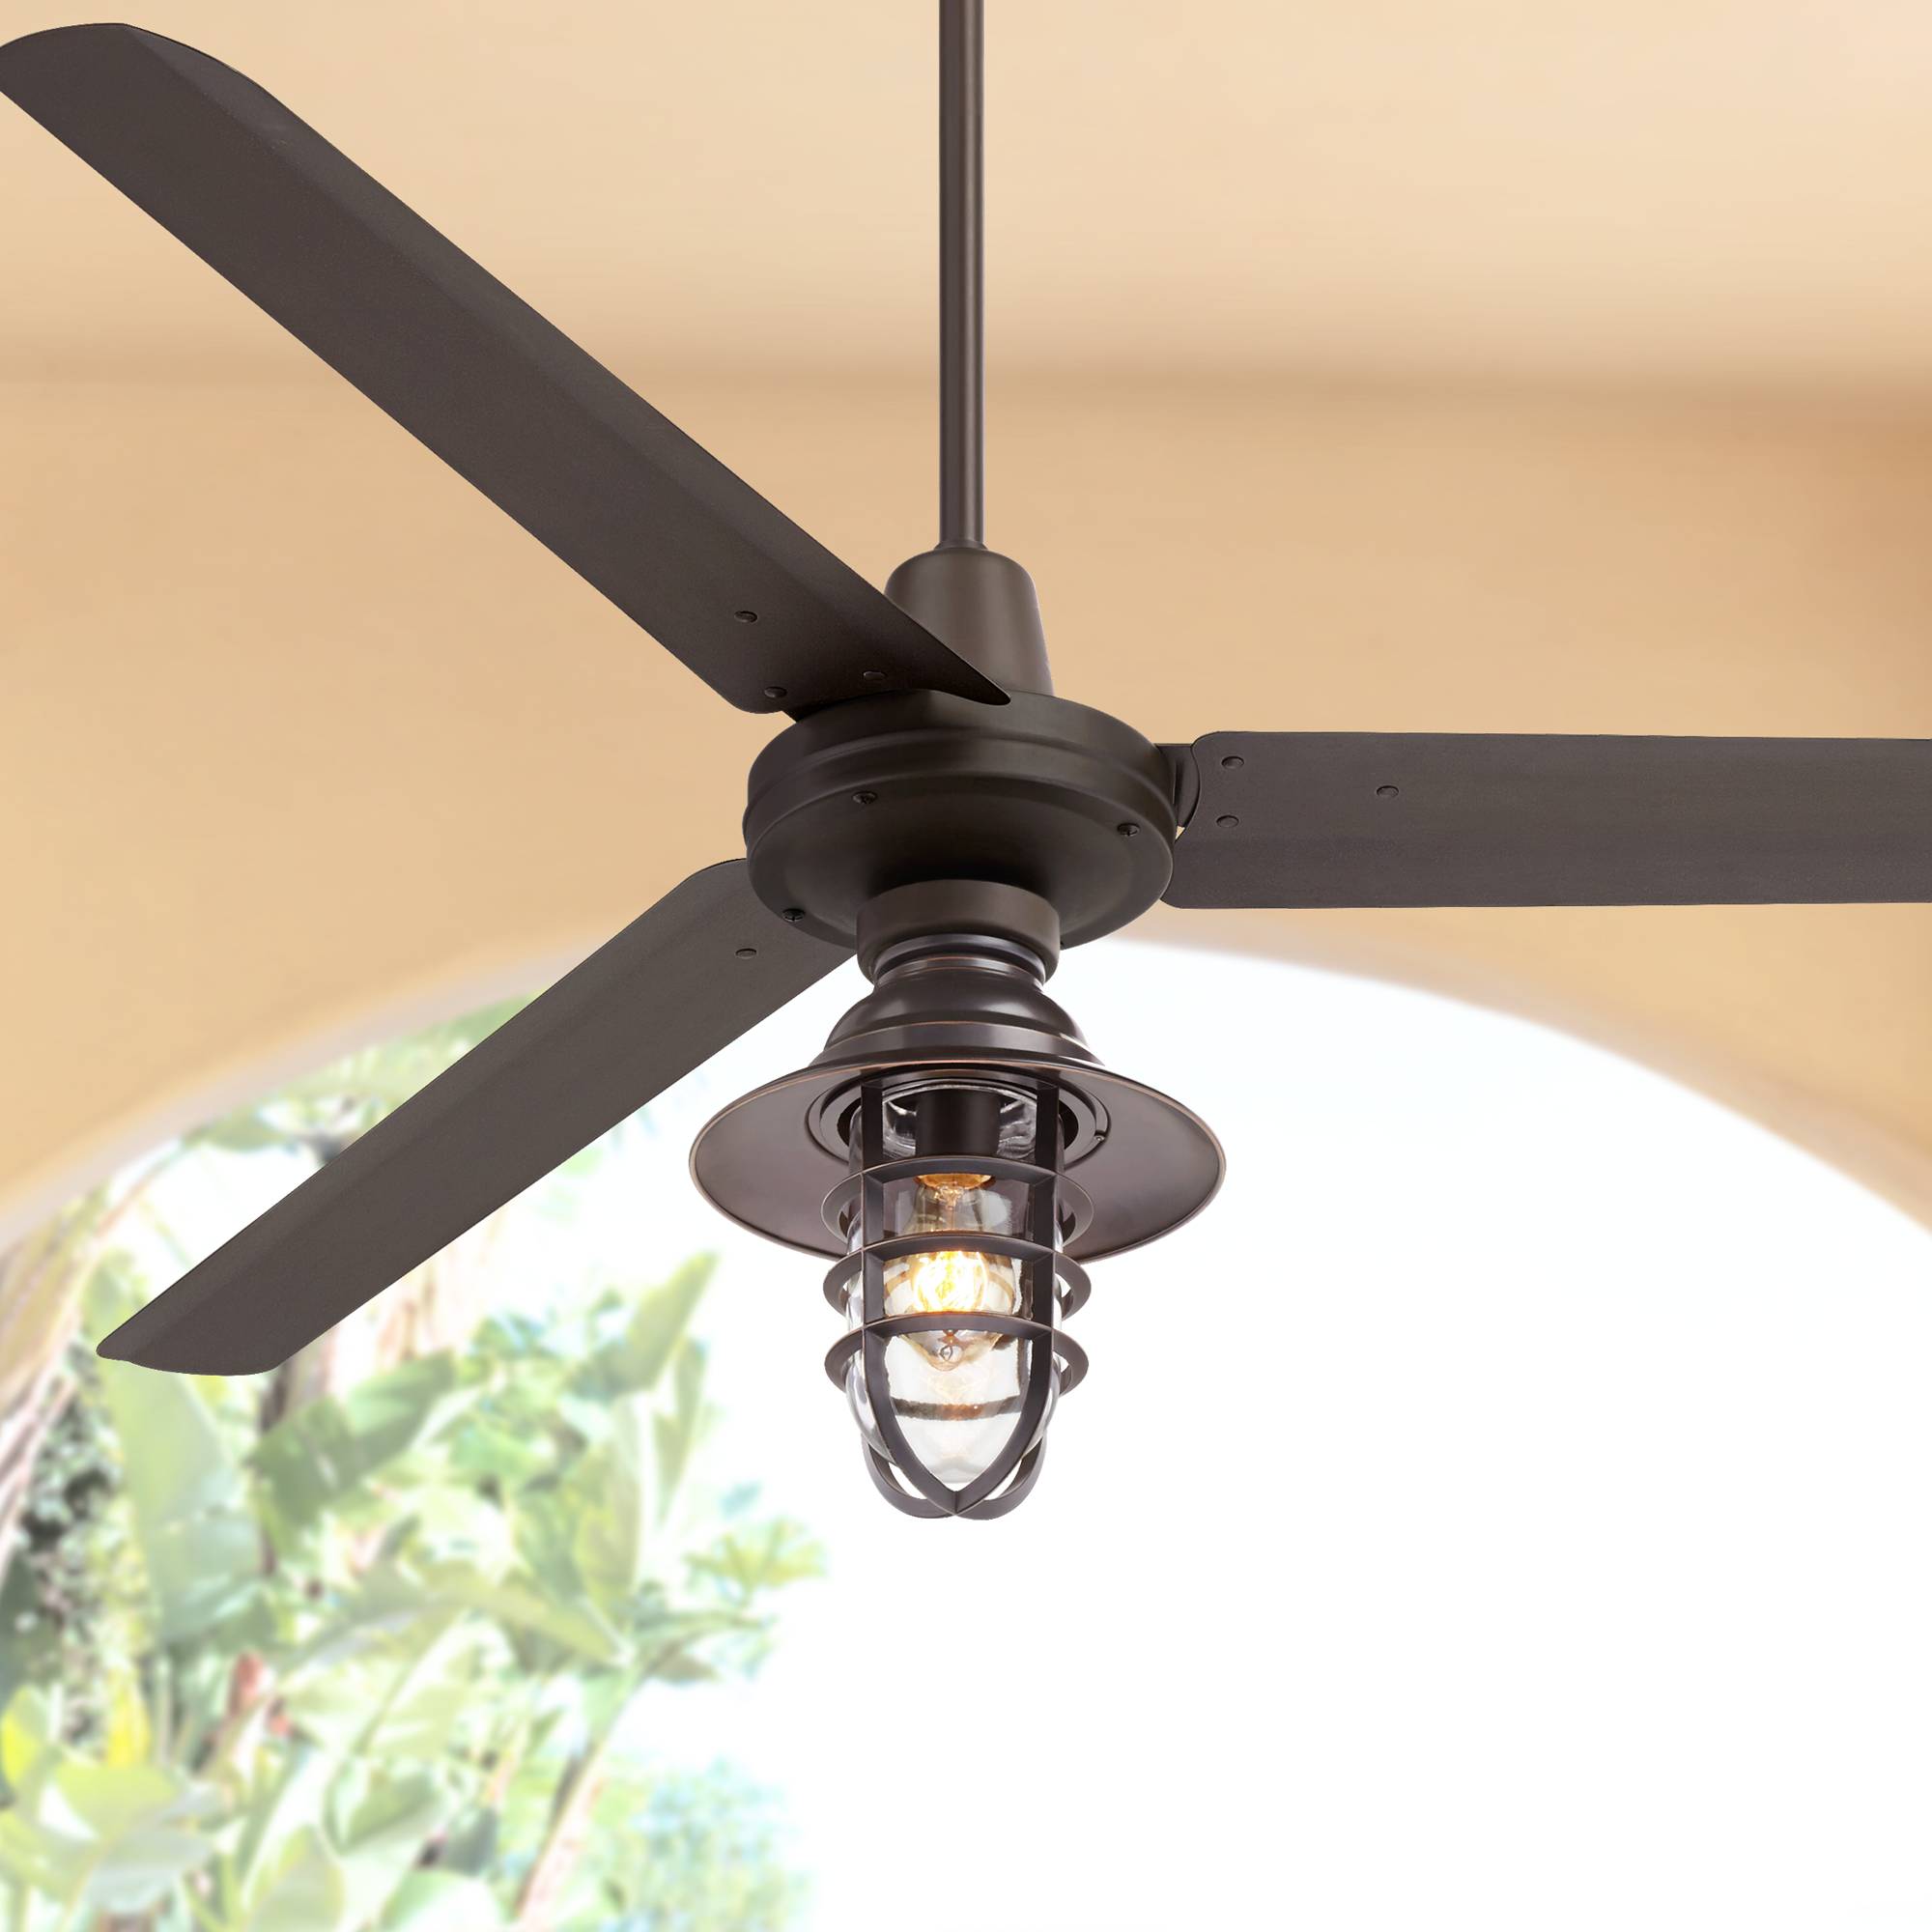 Details About 60 Industrial Outdoor Ceiling Fan With Led Light Remote Bronze Damp Patio Porch